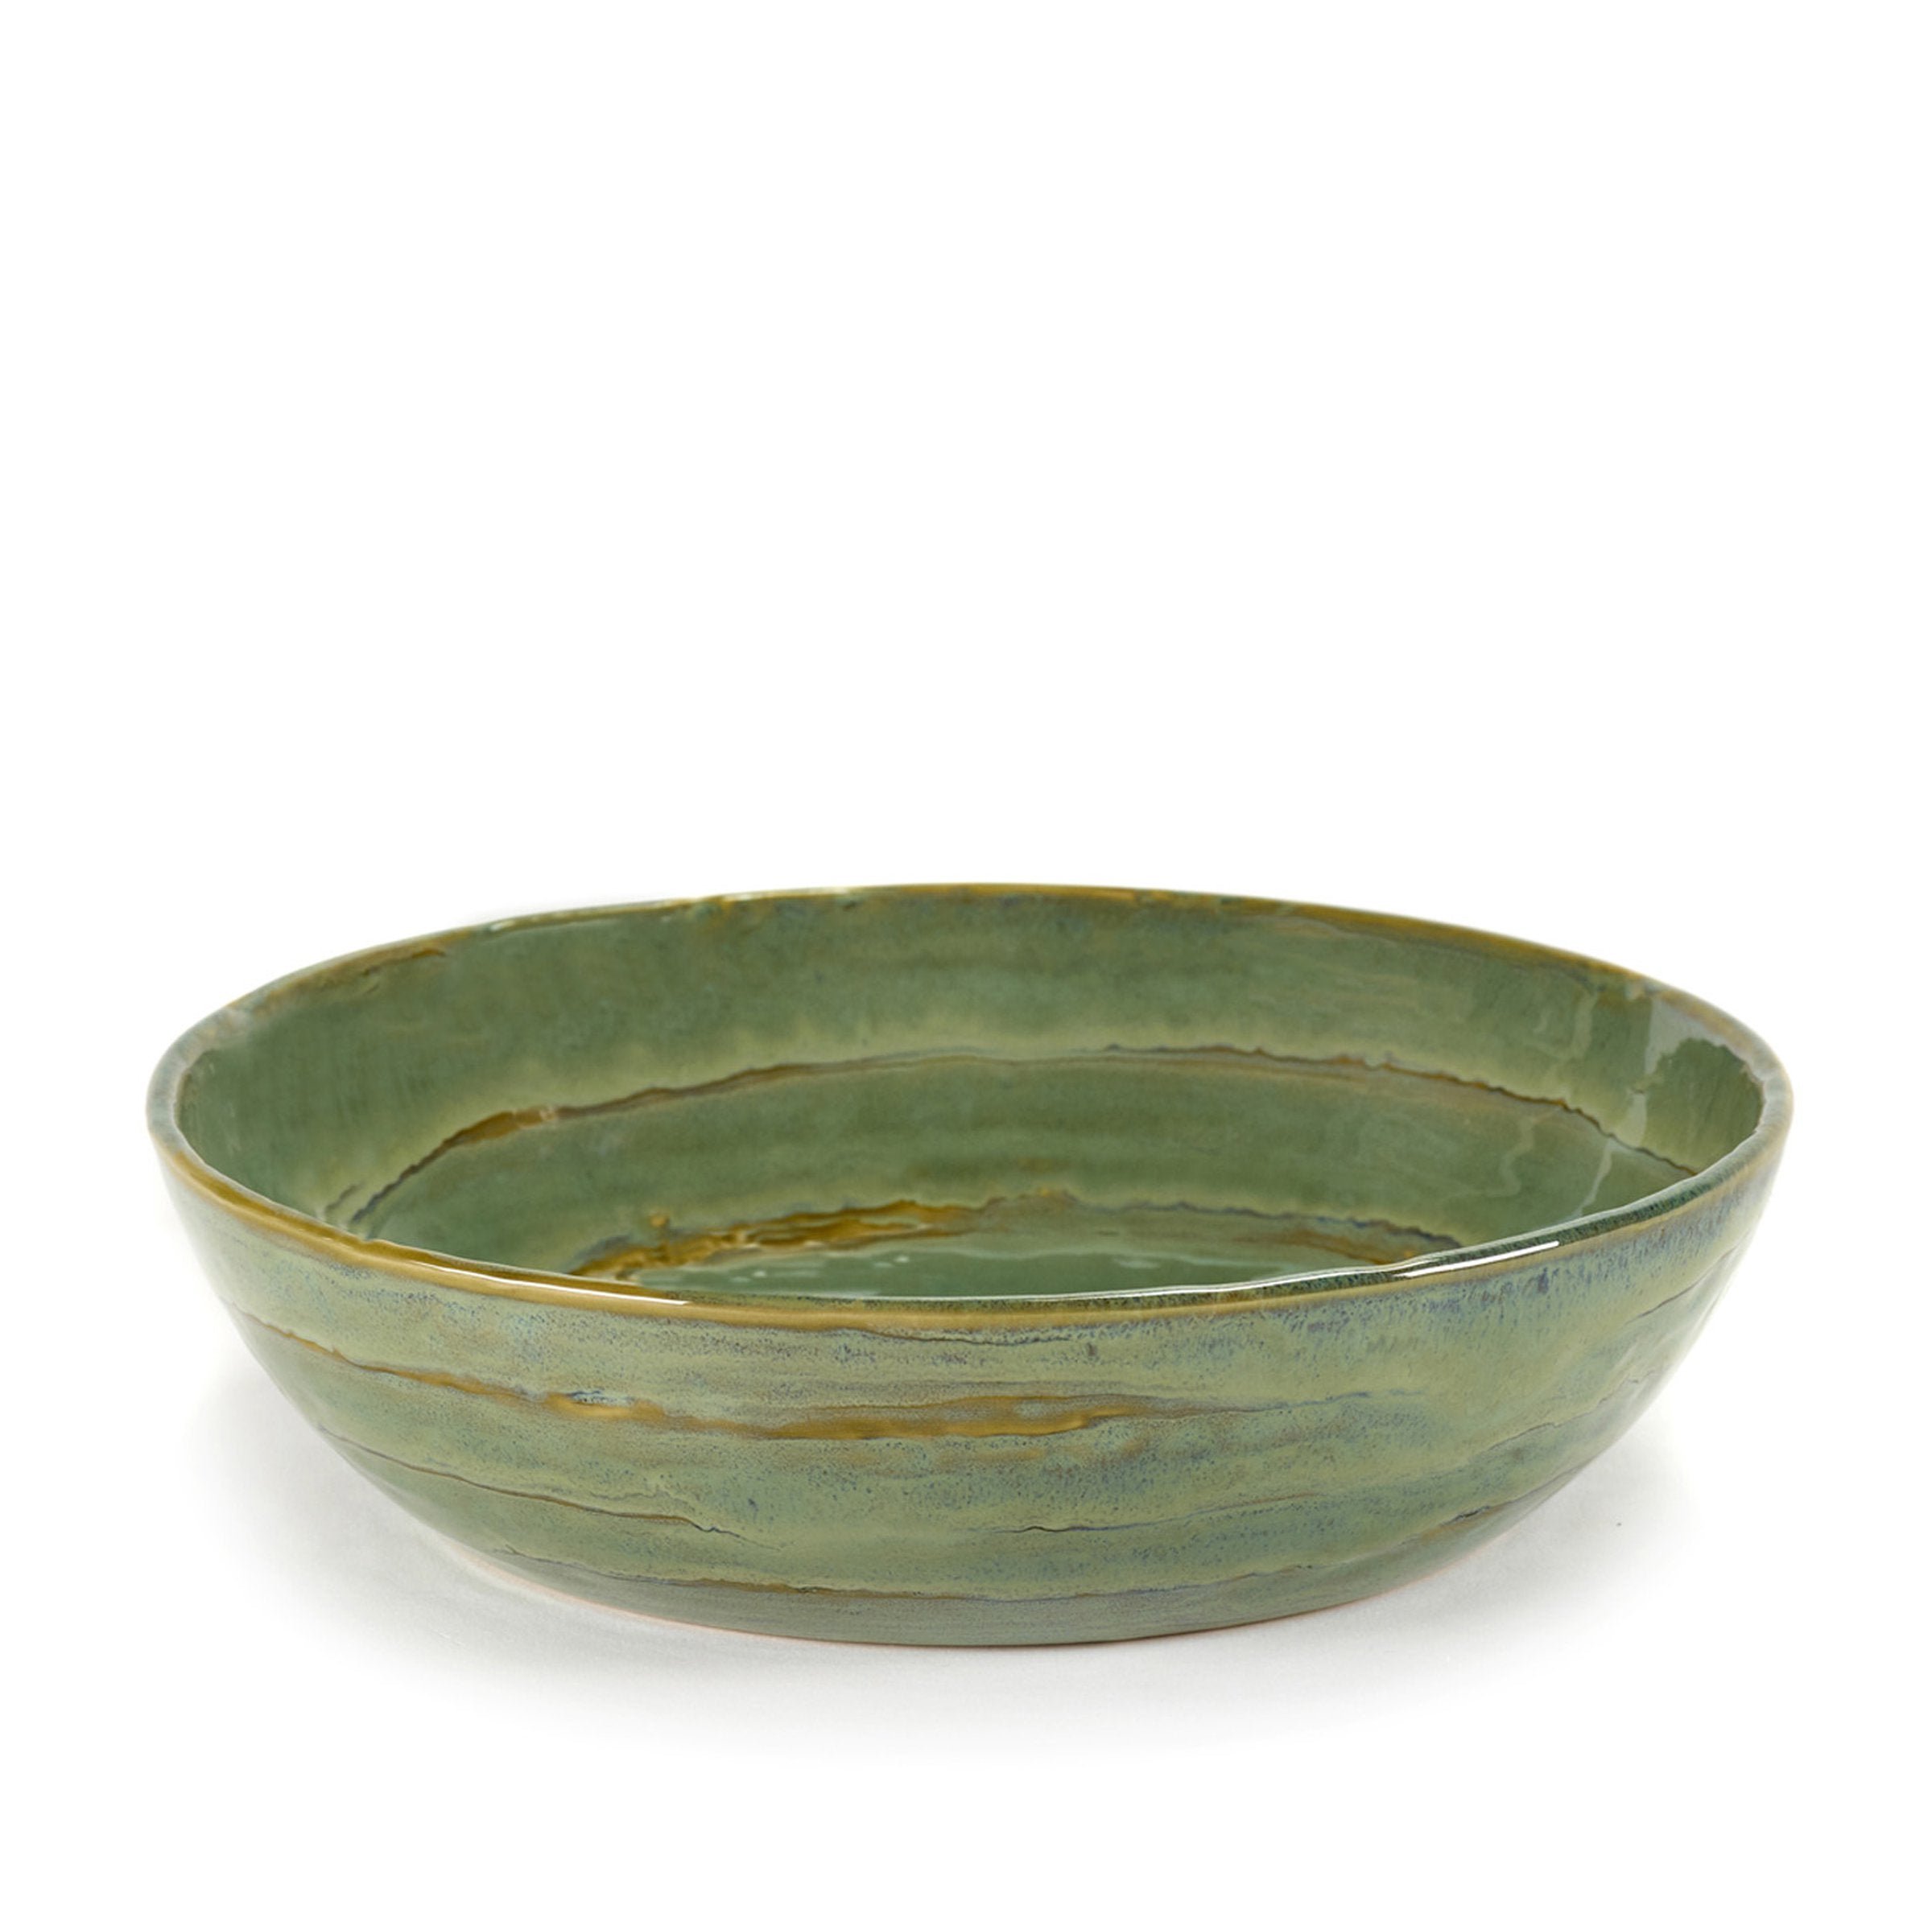 Pure Salad Bowl Seagreen Small - Set of 4